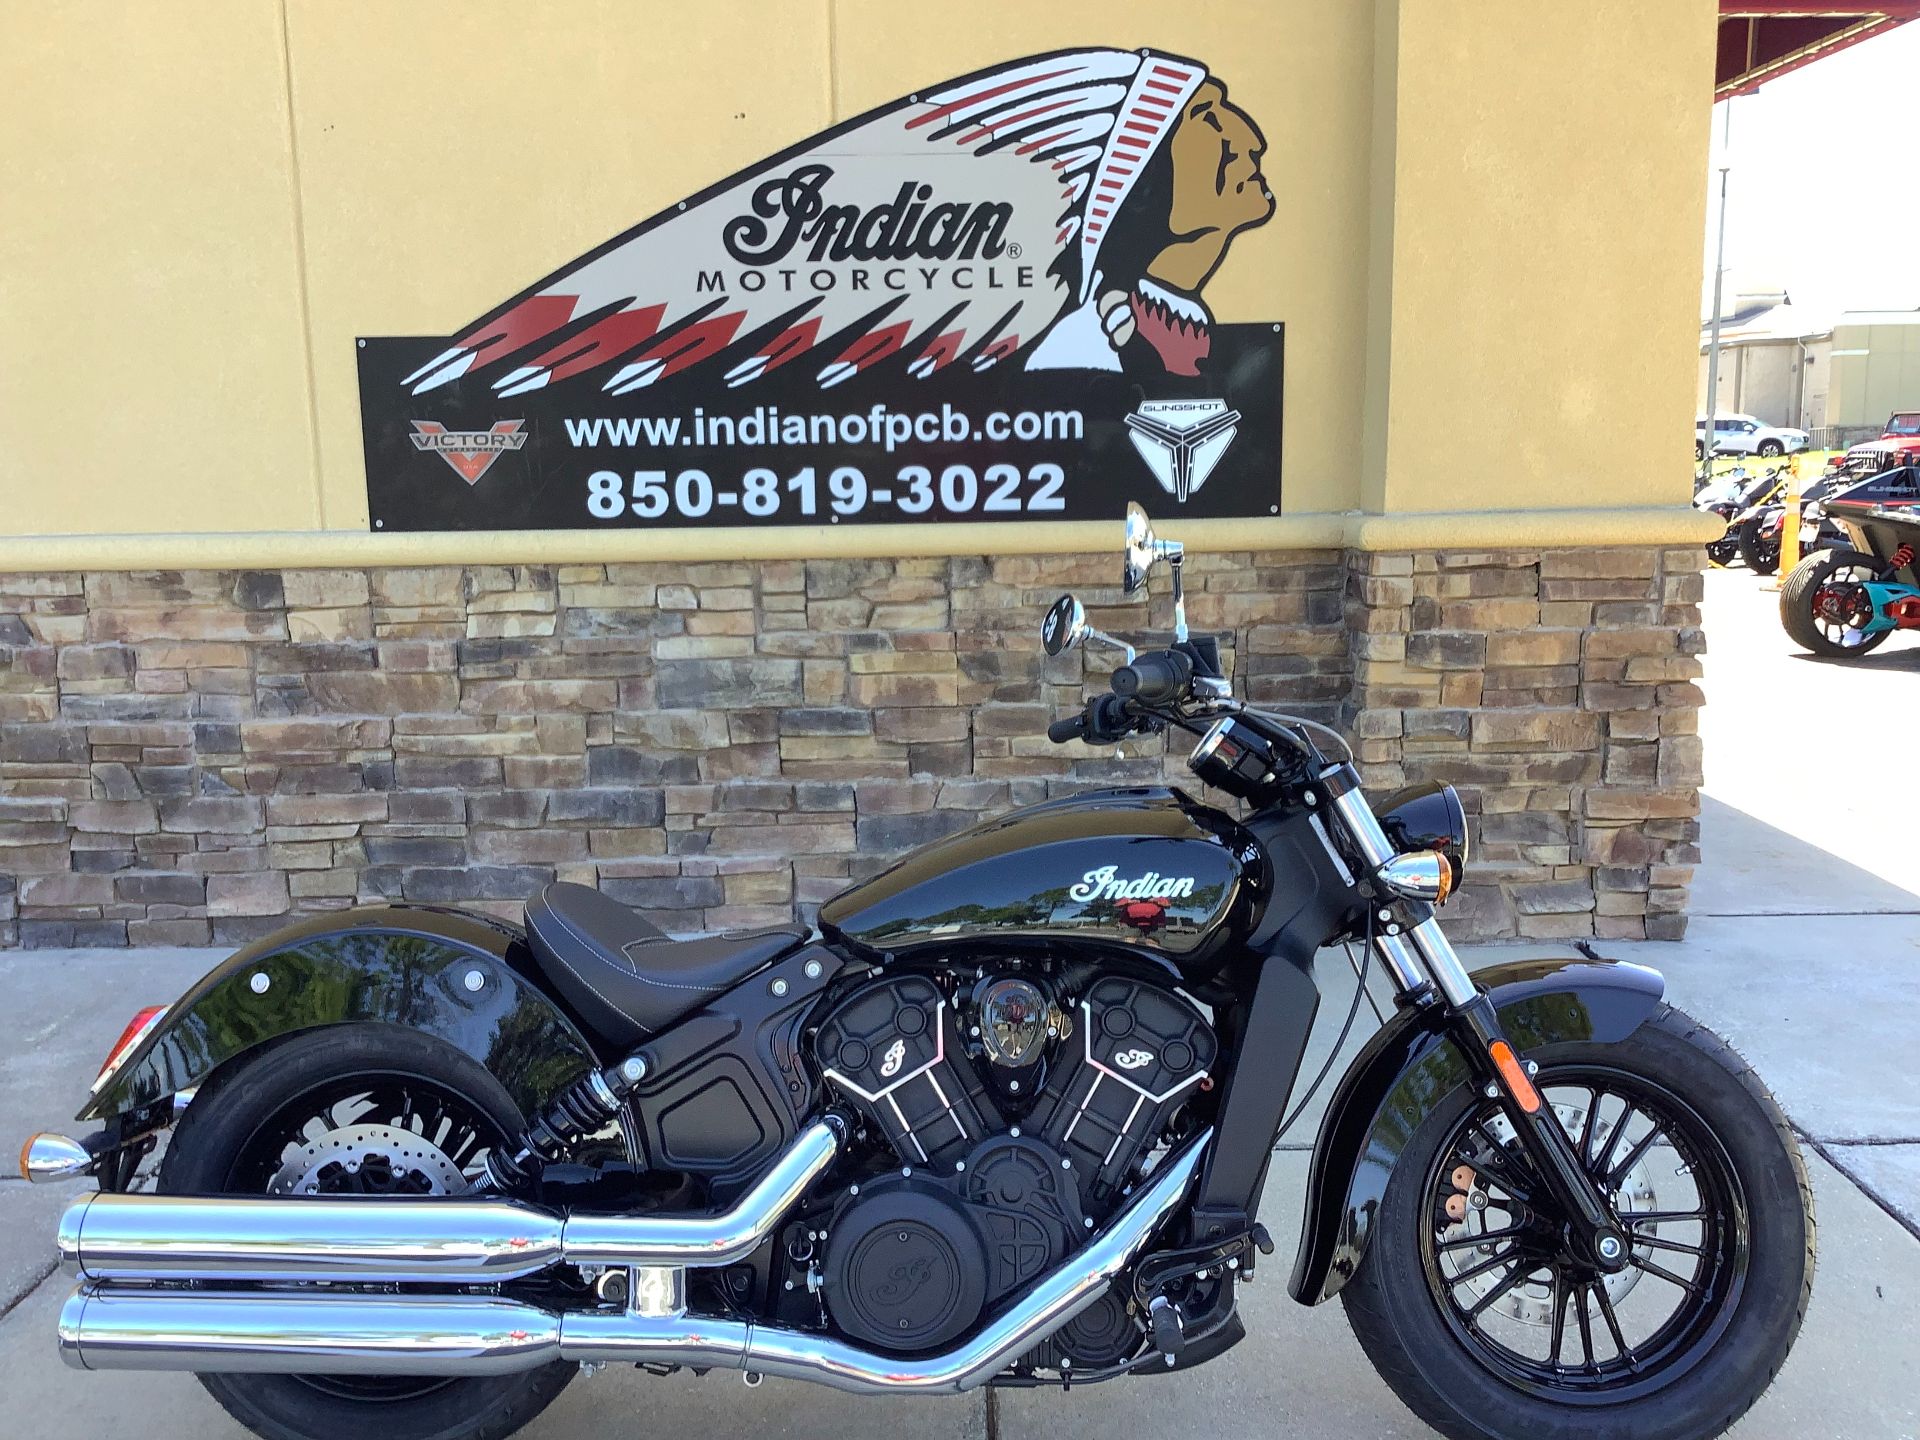 2022 Indian SCOUT 60 NON ABS in Panama City Beach, Florida - Photo 1